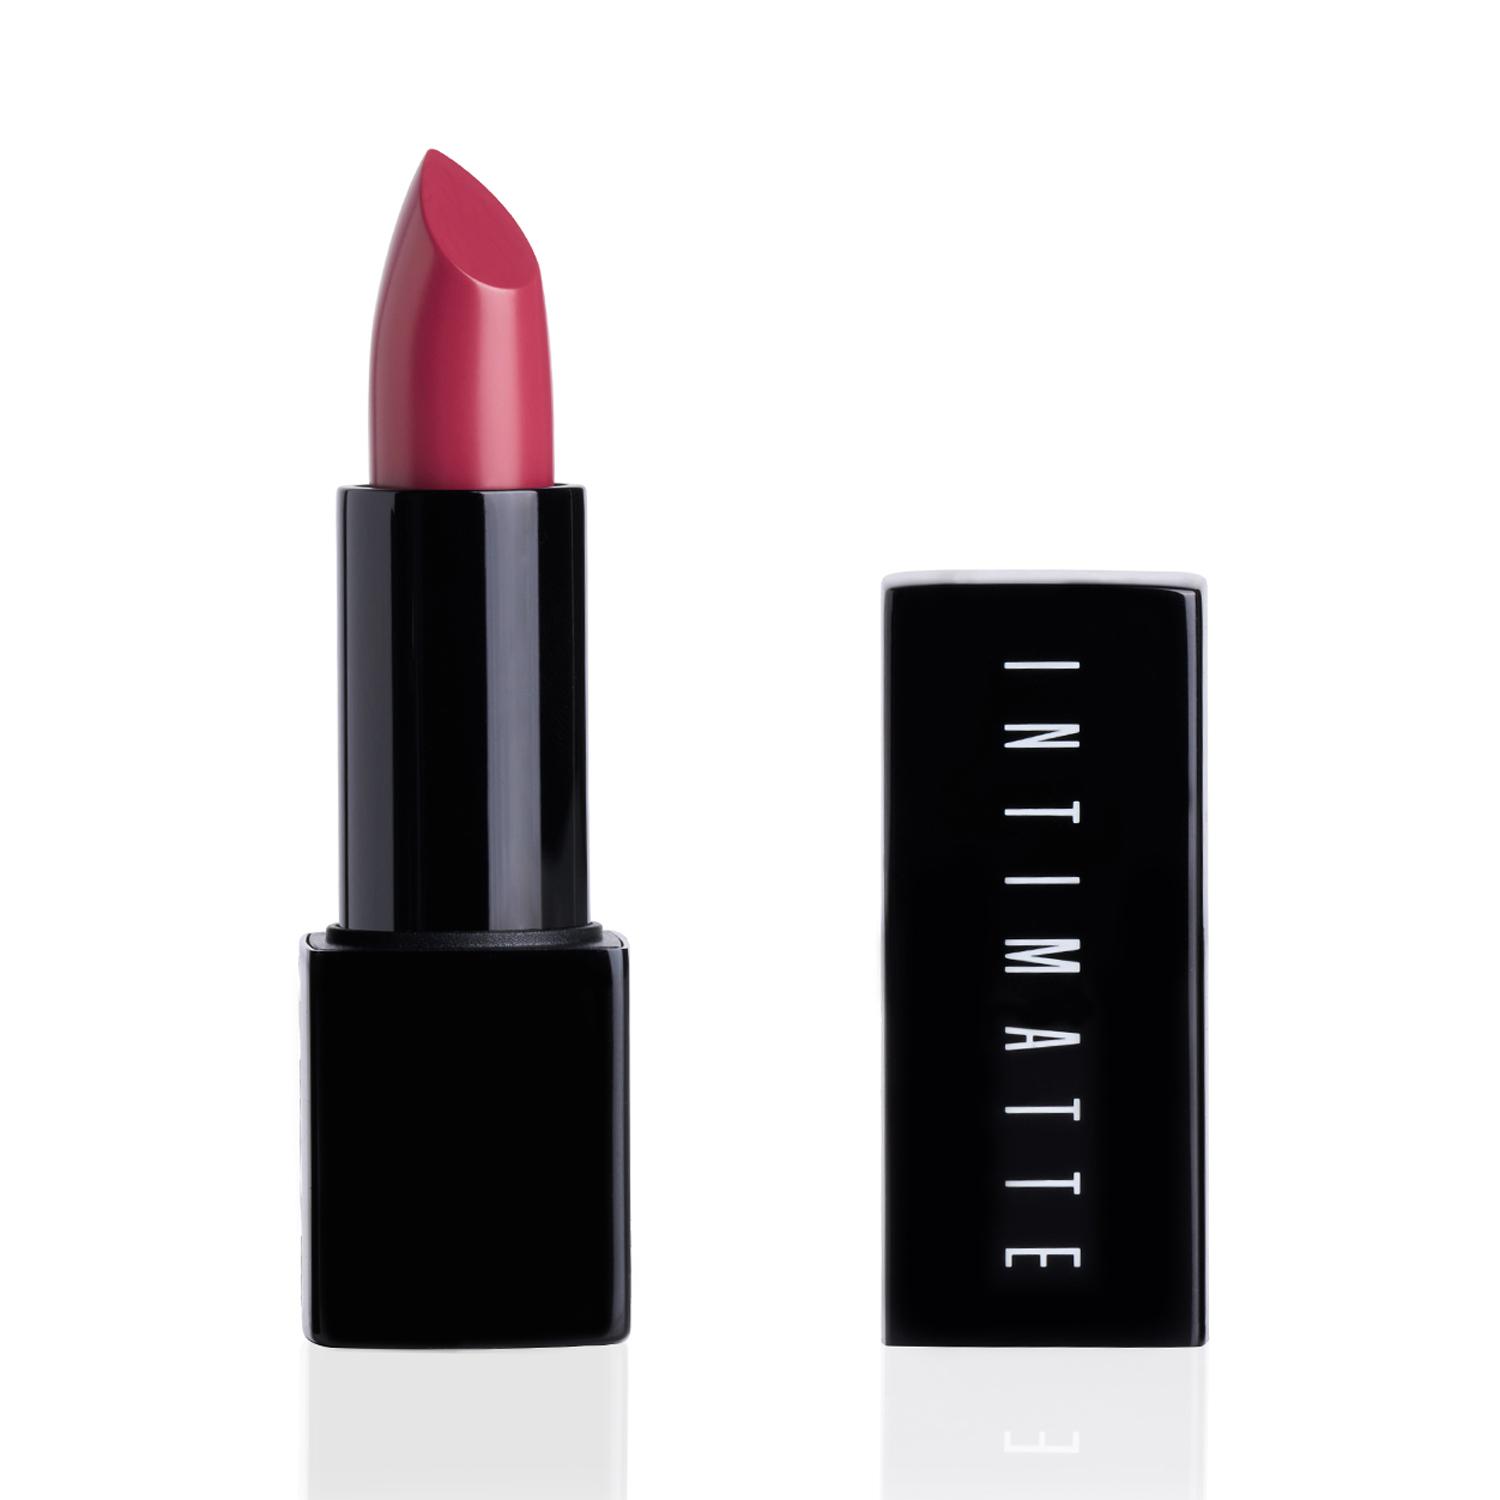 PAC | PAC Intimatte Lipstick - The Only Exception (4g)